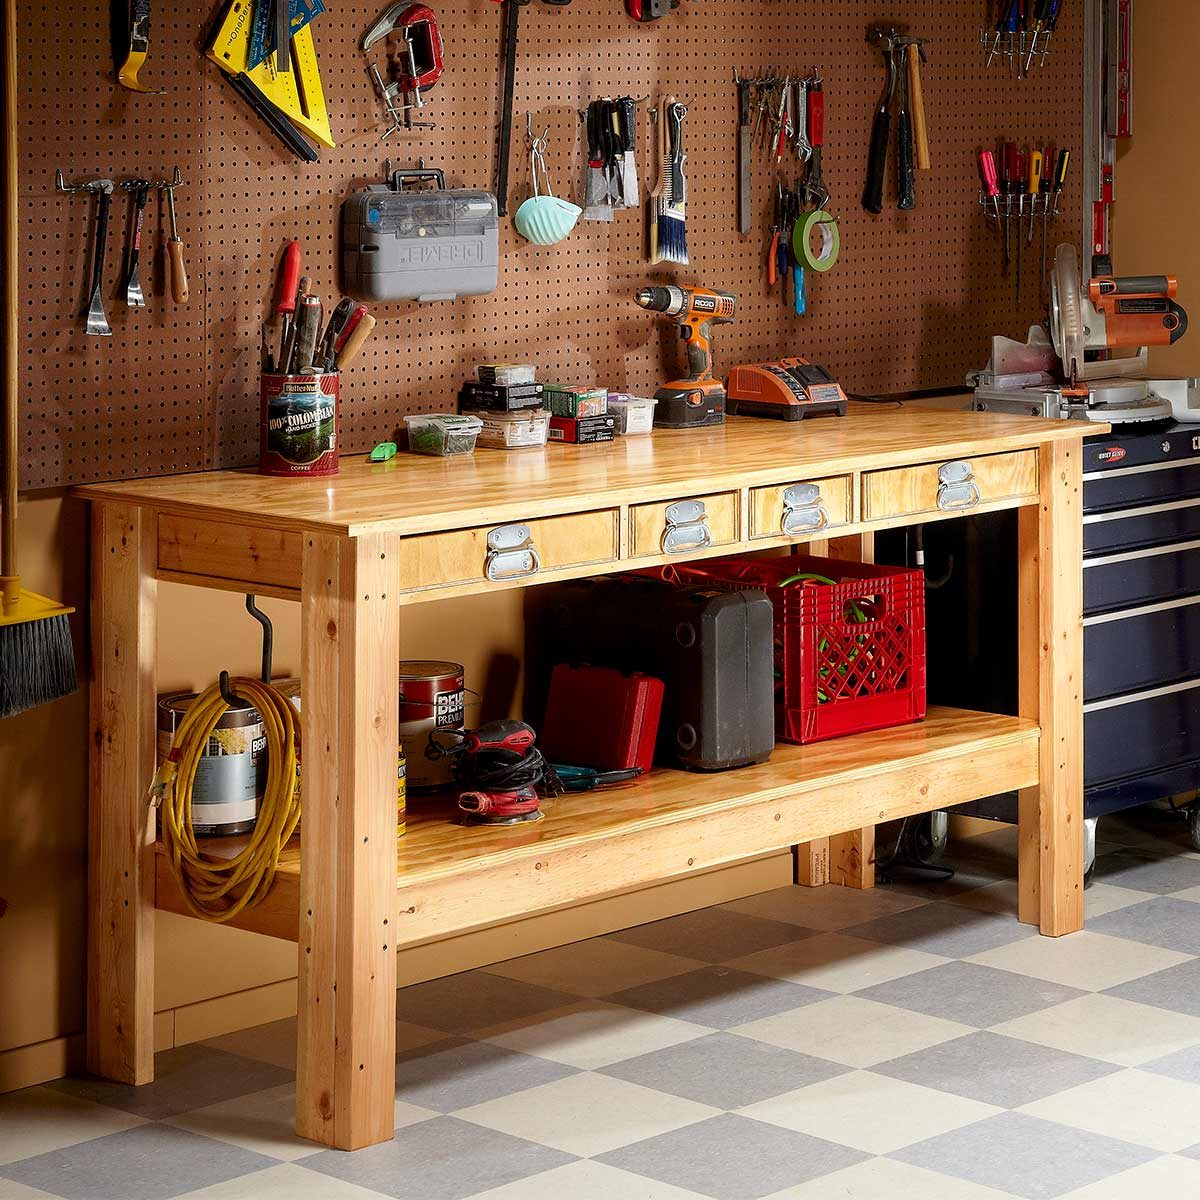 14 SuperSimple Workbenches You Can Build — The Family Handyman